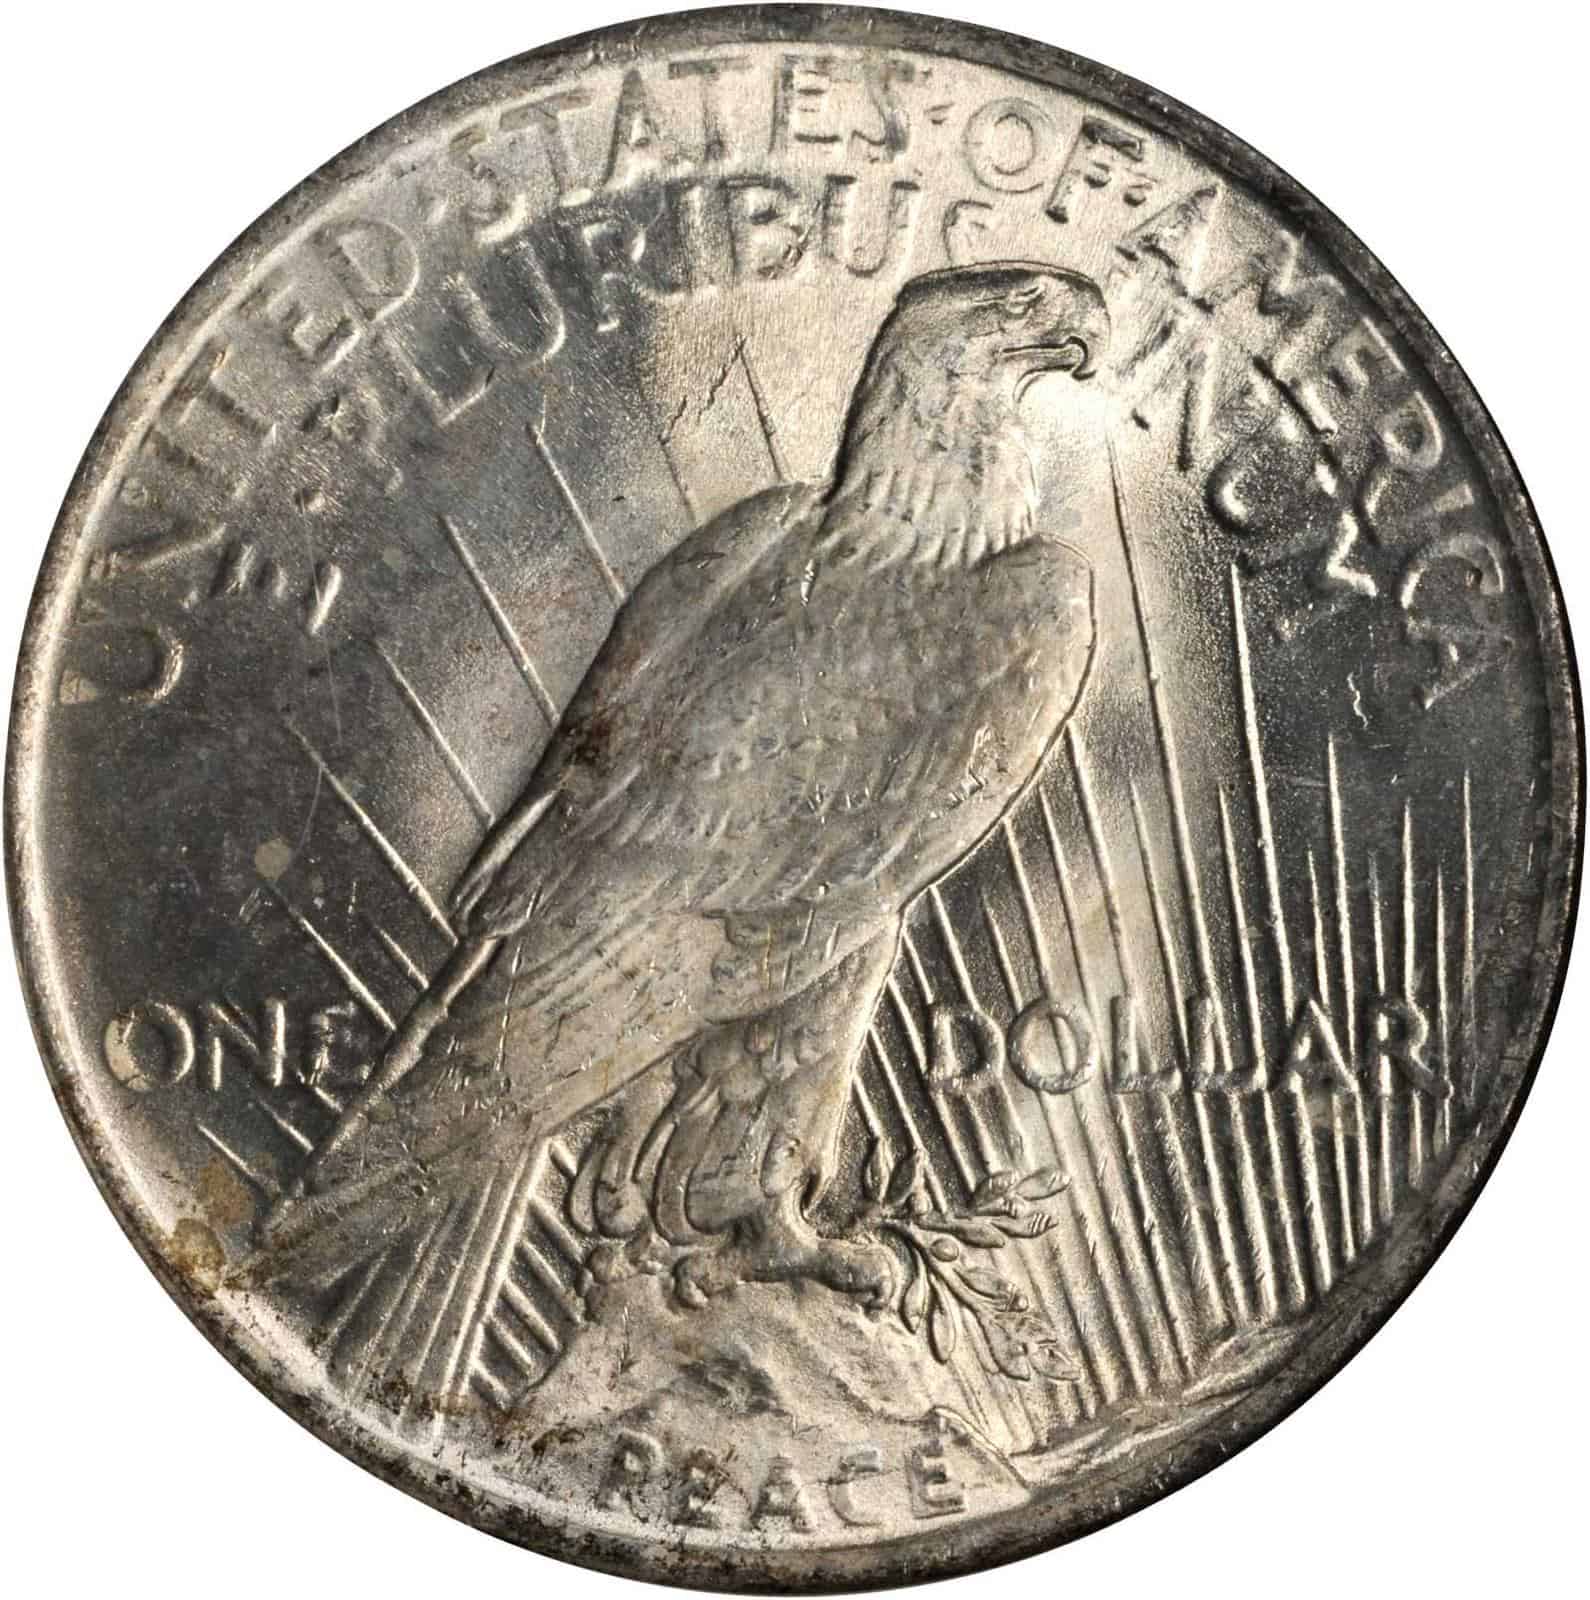 The Reverse of the 1923 Silver Dollar